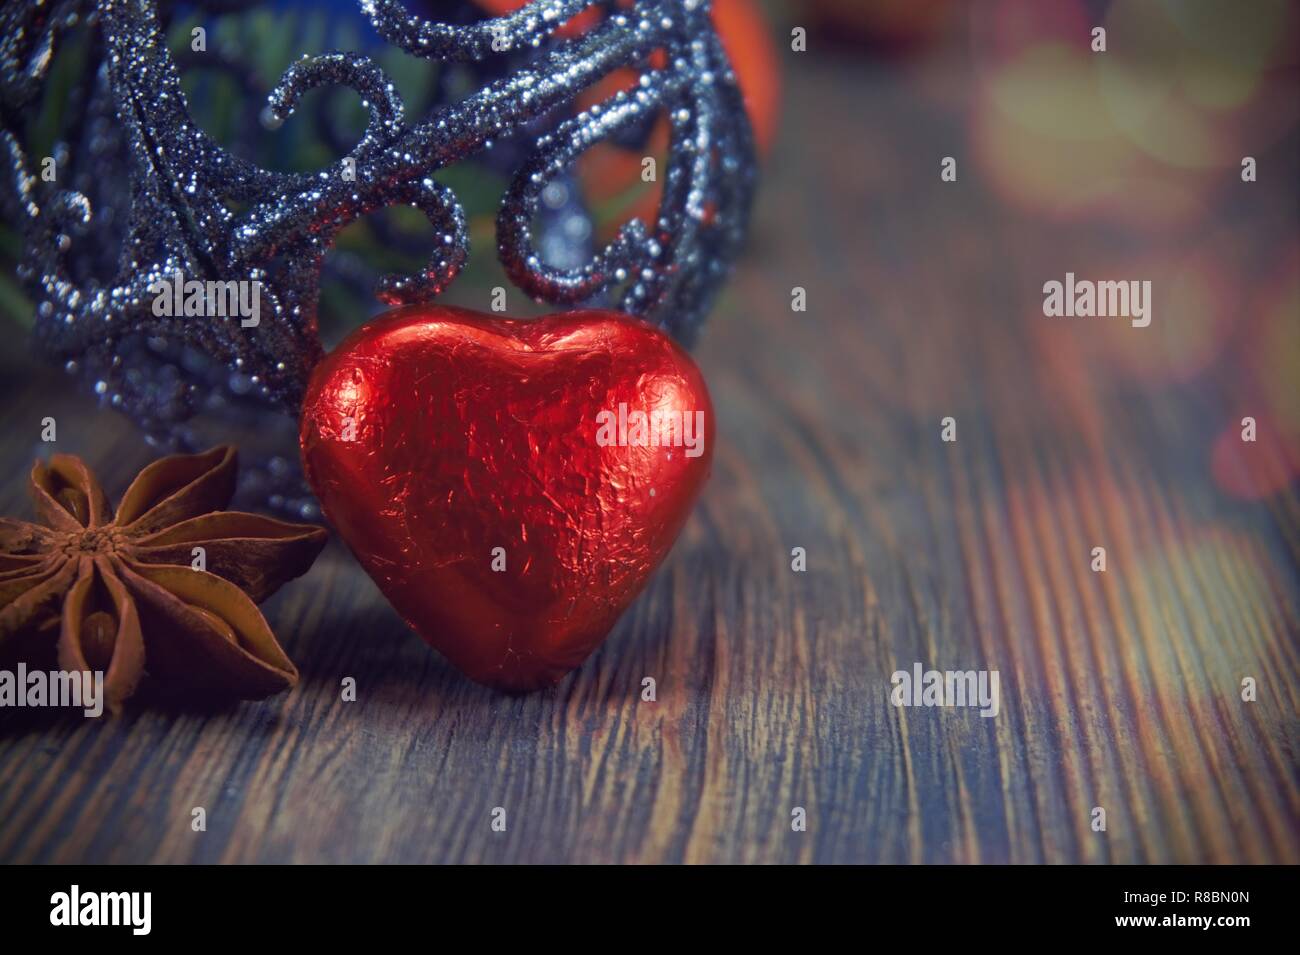 Red heart shaped chocolate and anise star next to christmas ball sitting on weathered wood surface background with copy space. Stock Photo